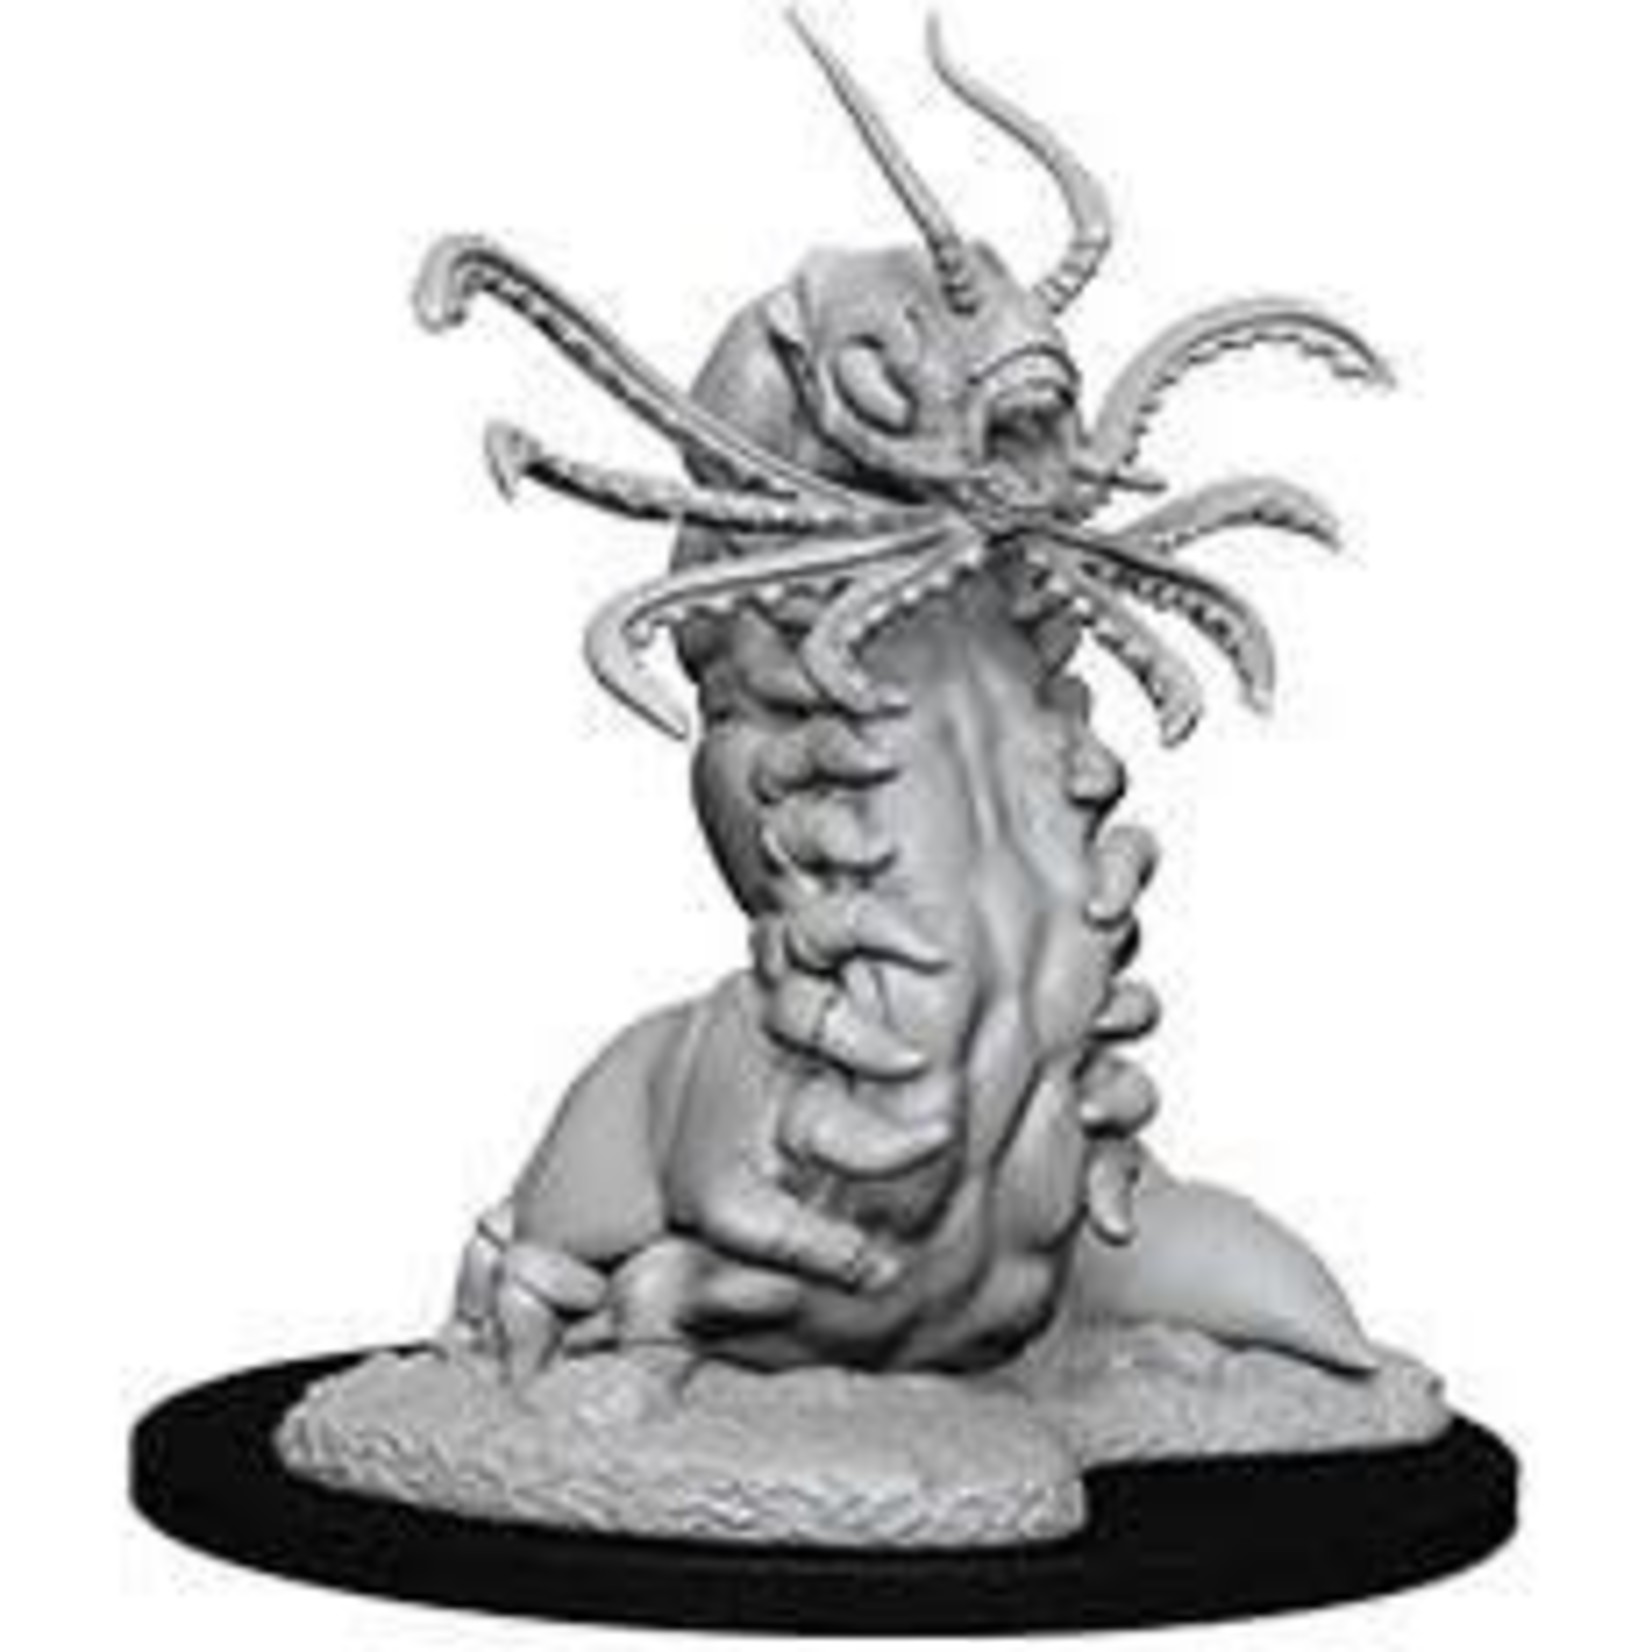 WizKids Dungeons and Dragons Nolzur's Marvelous Minis Carrion Crawler